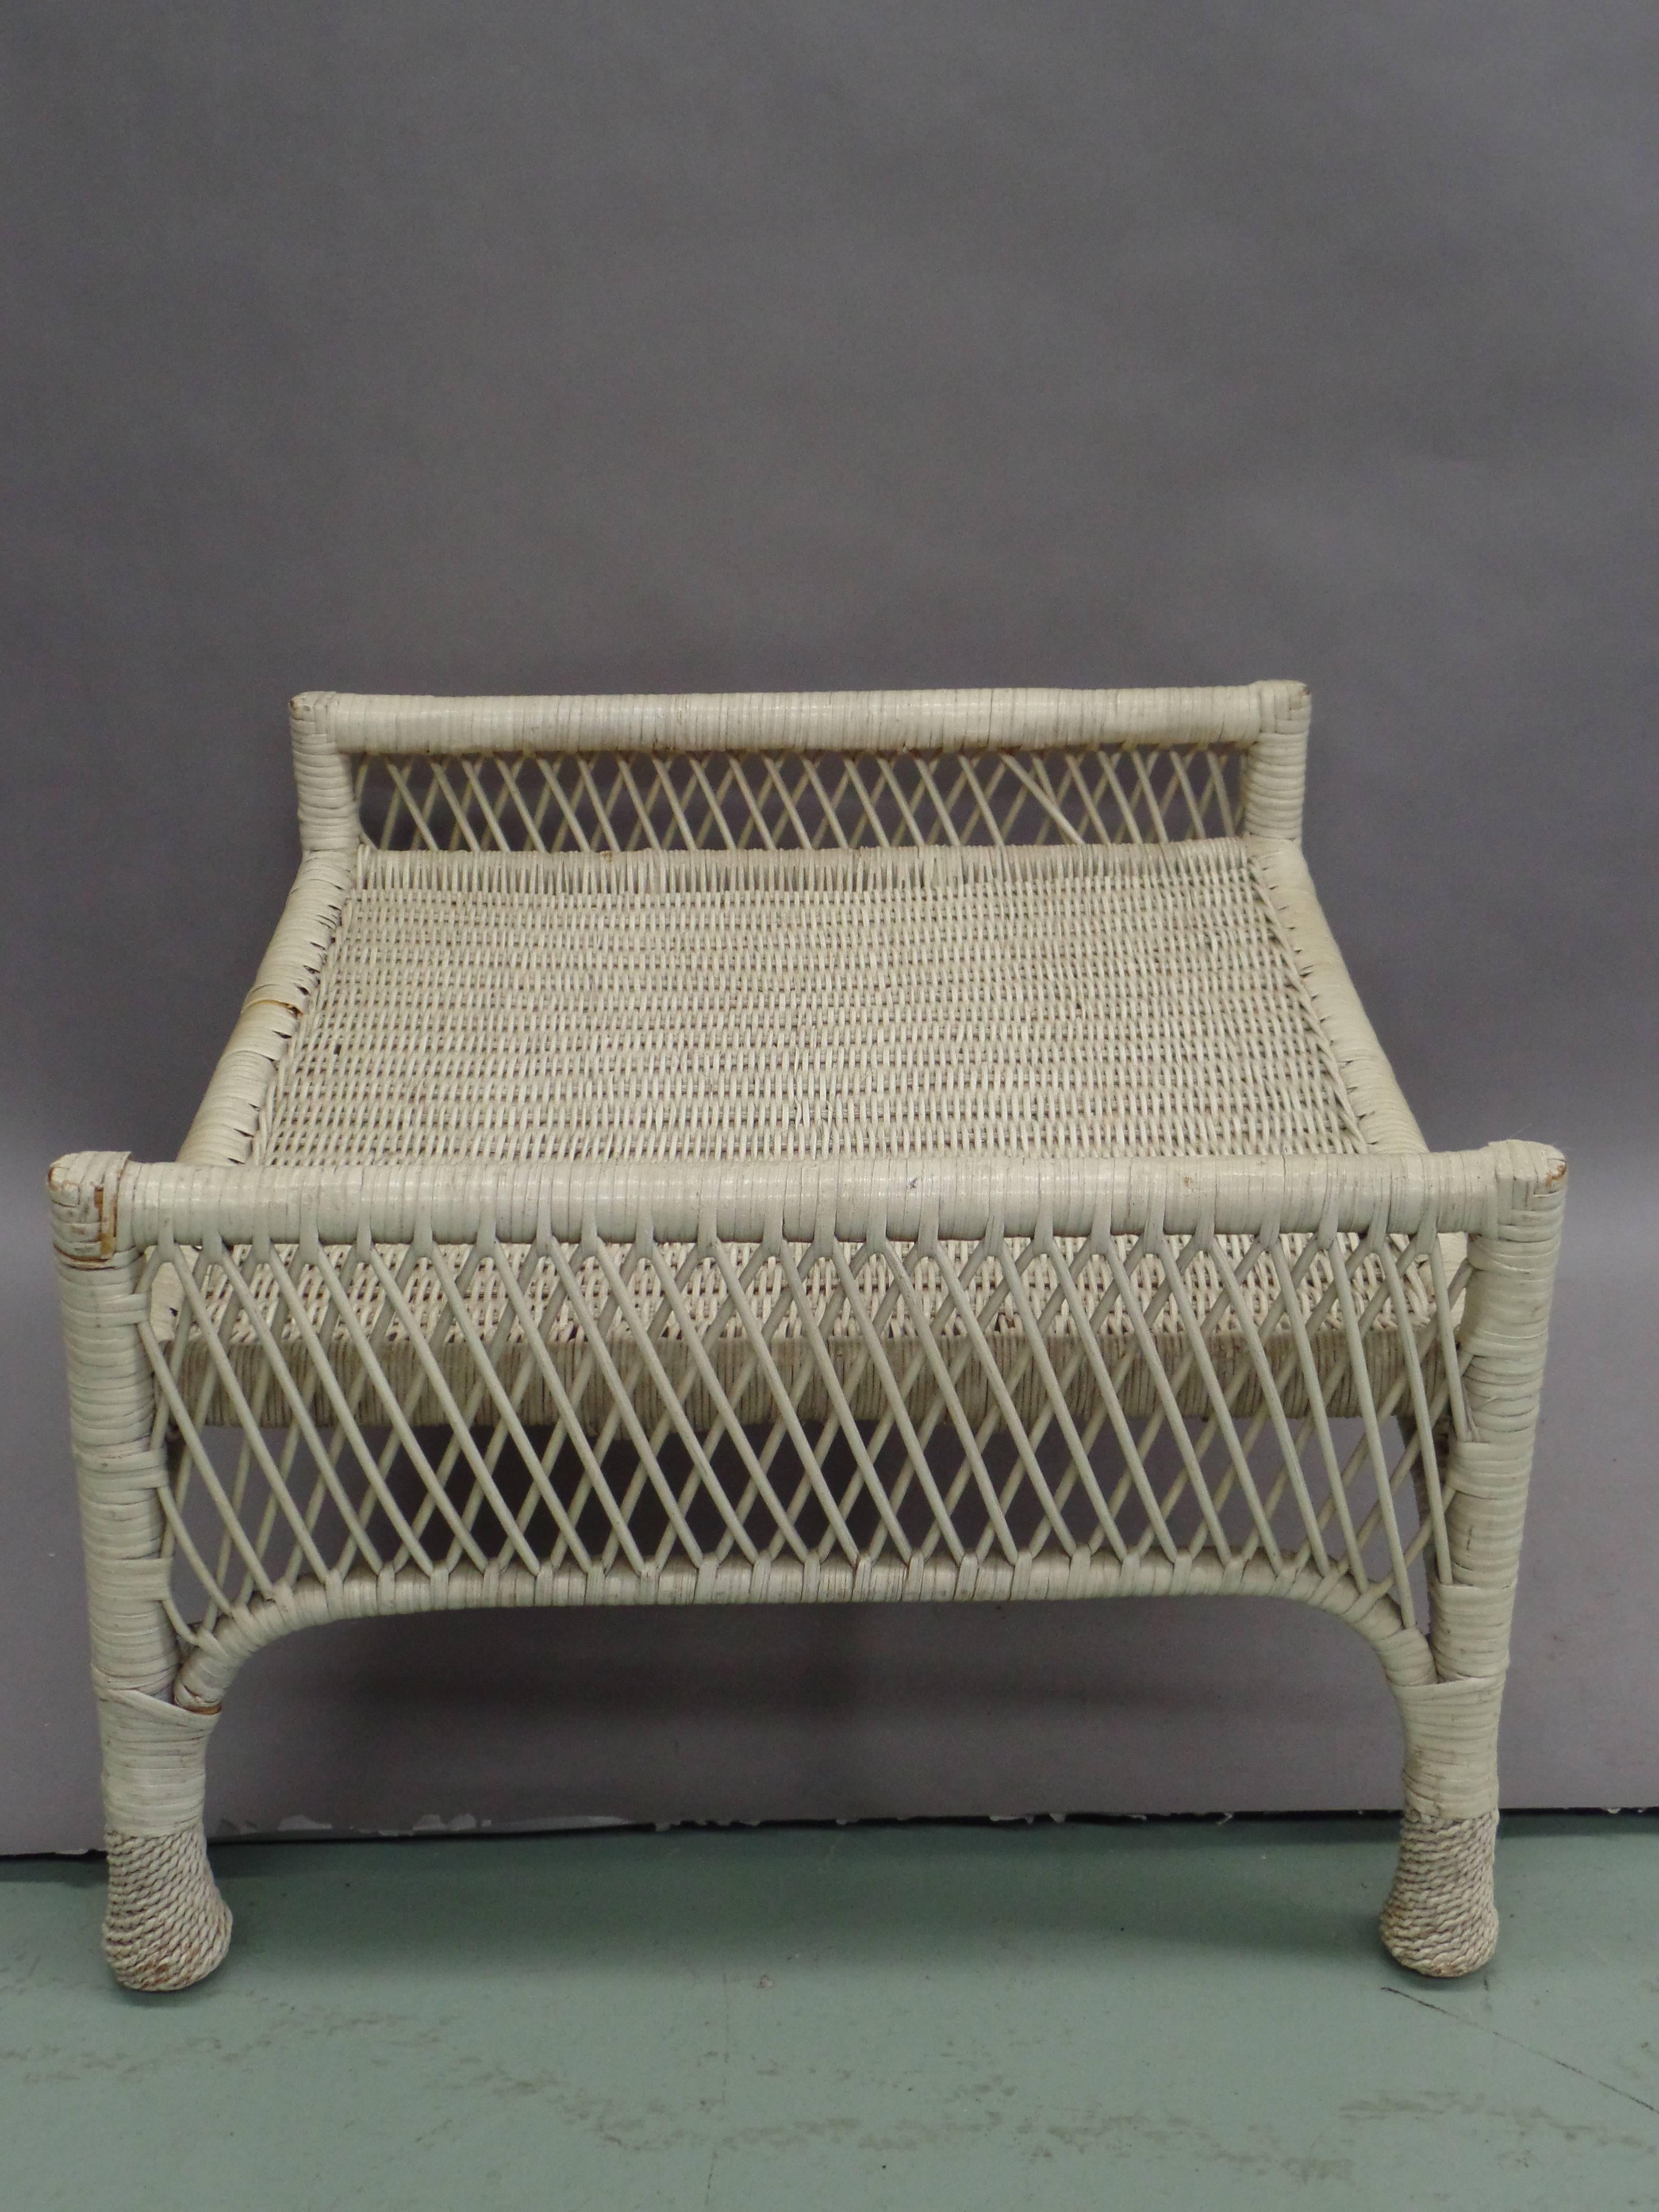 French Pair of Mid-Century Modern Bamboo & Rattan Wicker Stools, Benches or Ottoman